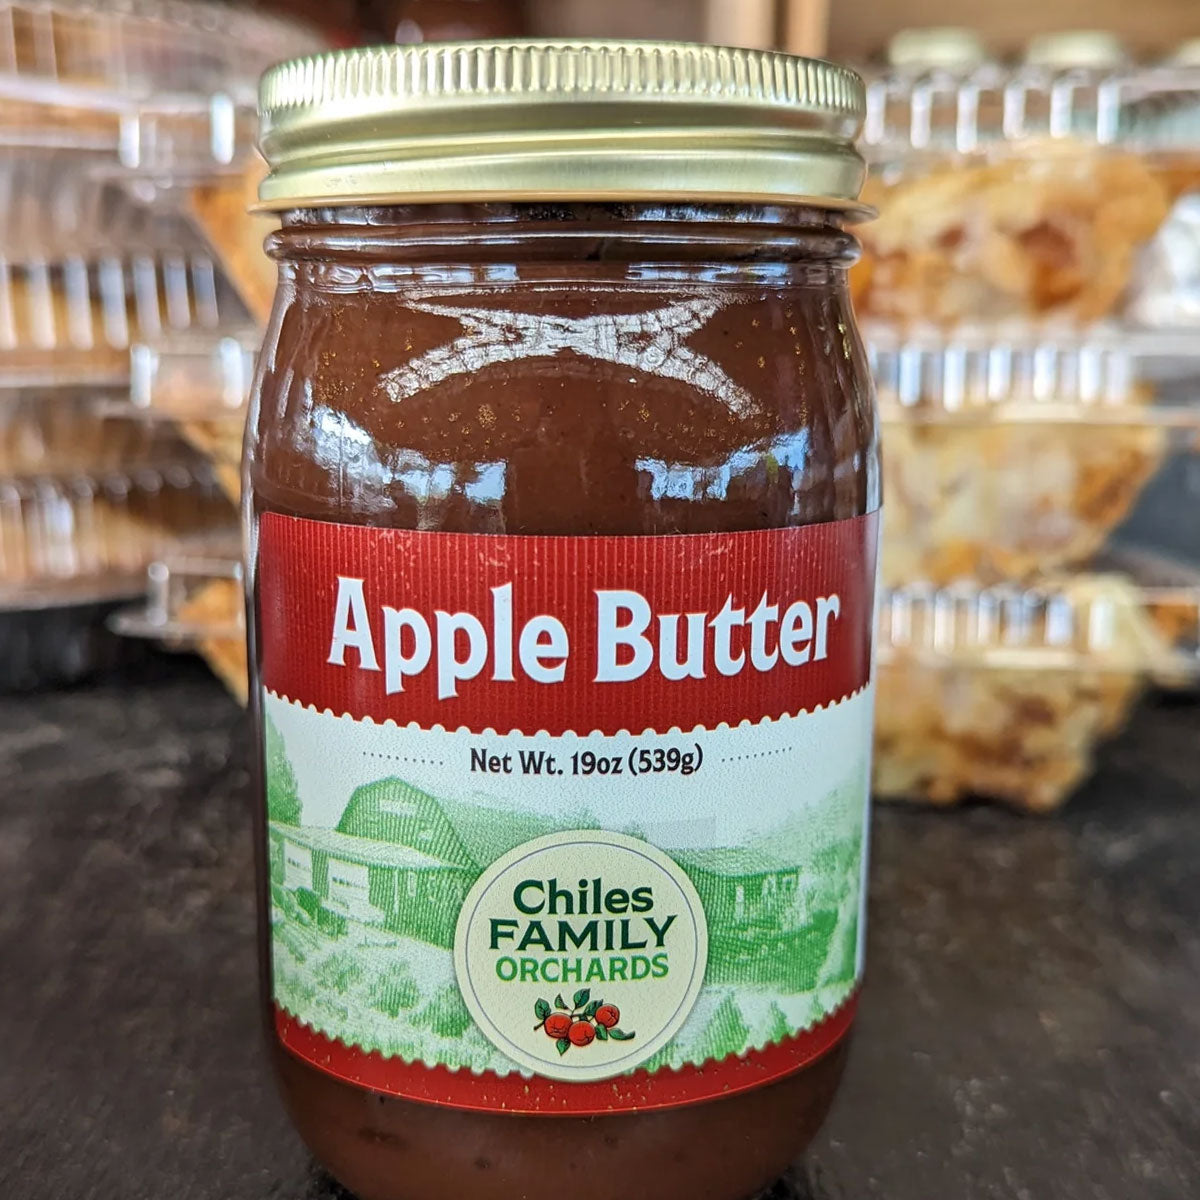 Apple butter jar in front of pies